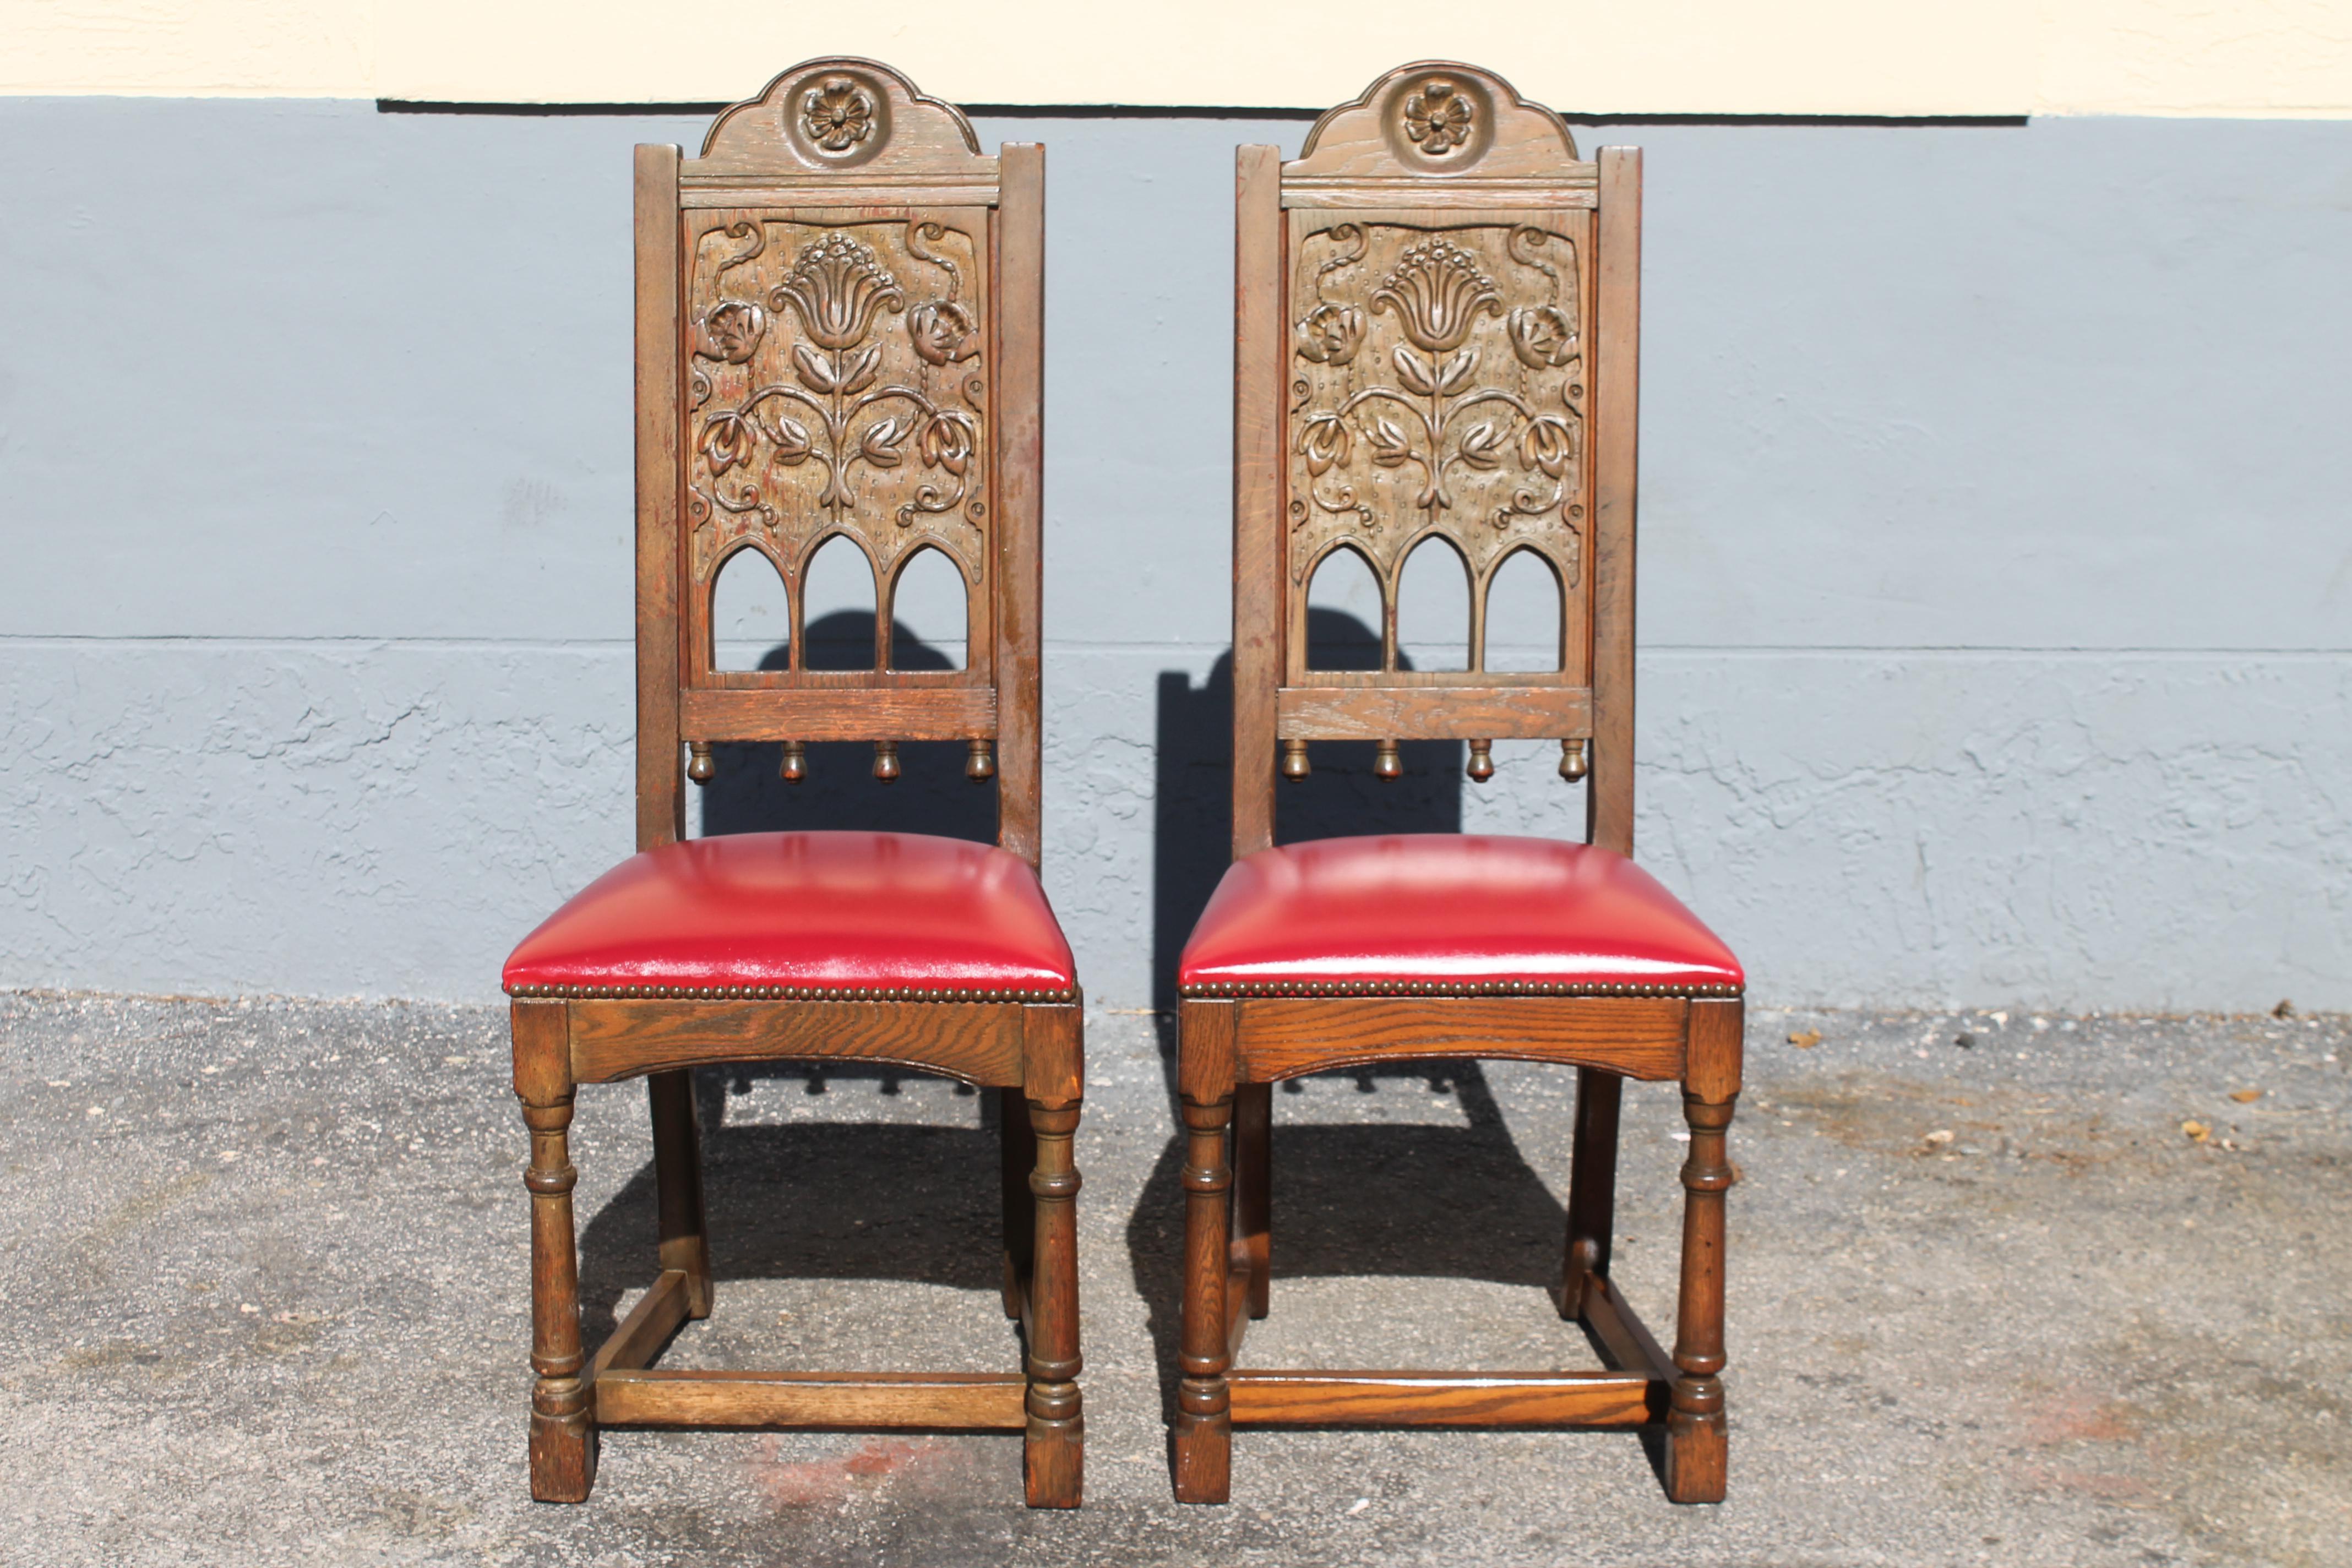 Wood 19thc French Rennaisance Revival Carved Center Table + Pair Chairs  Set of 3 pcs For Sale